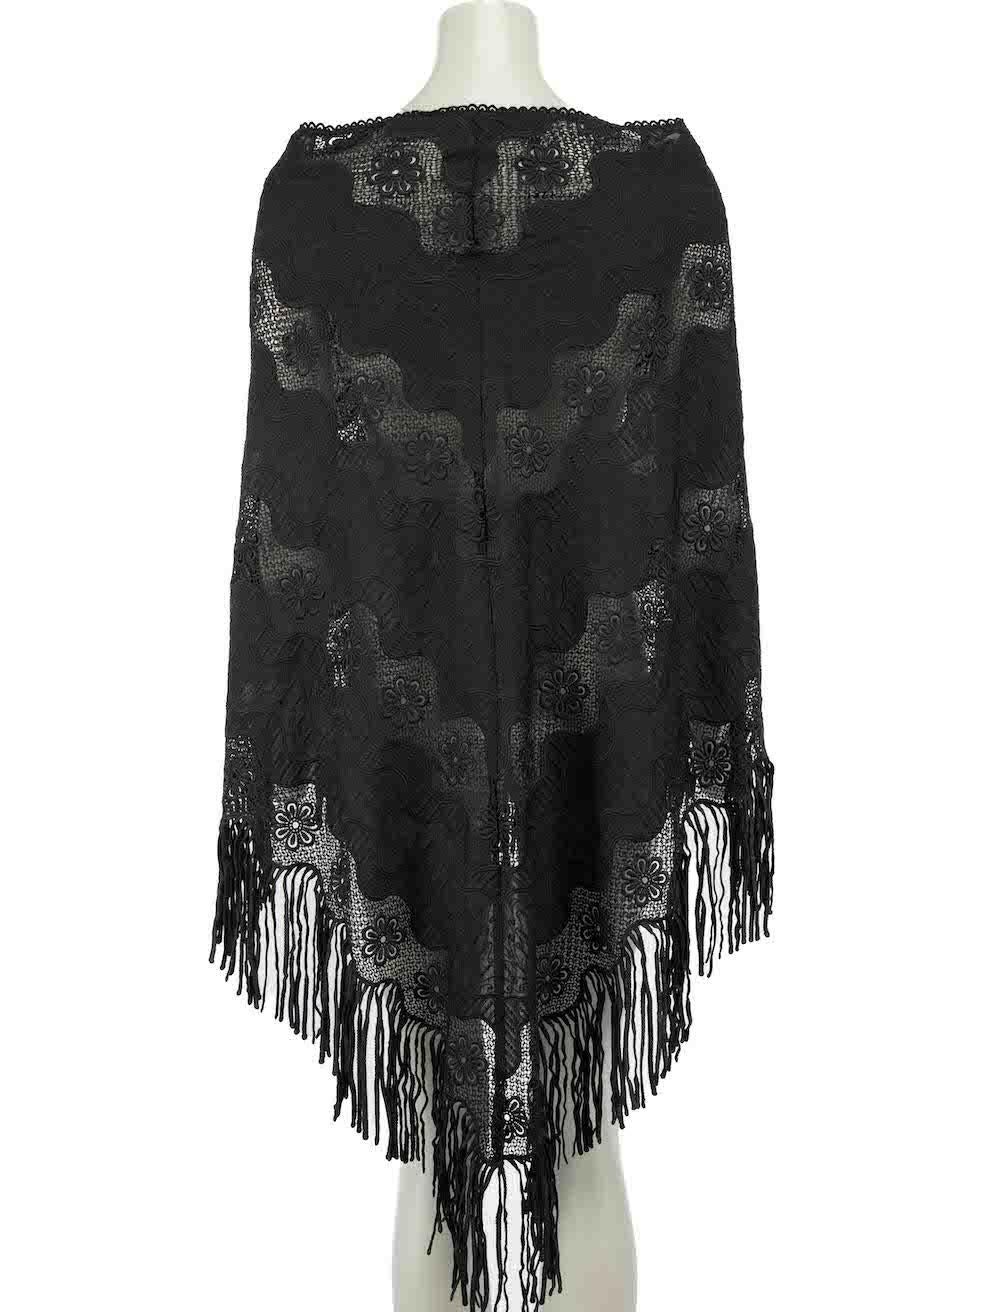 Miguelina Black Floral Lace Tassel Shawl In New Condition For Sale In London, GB